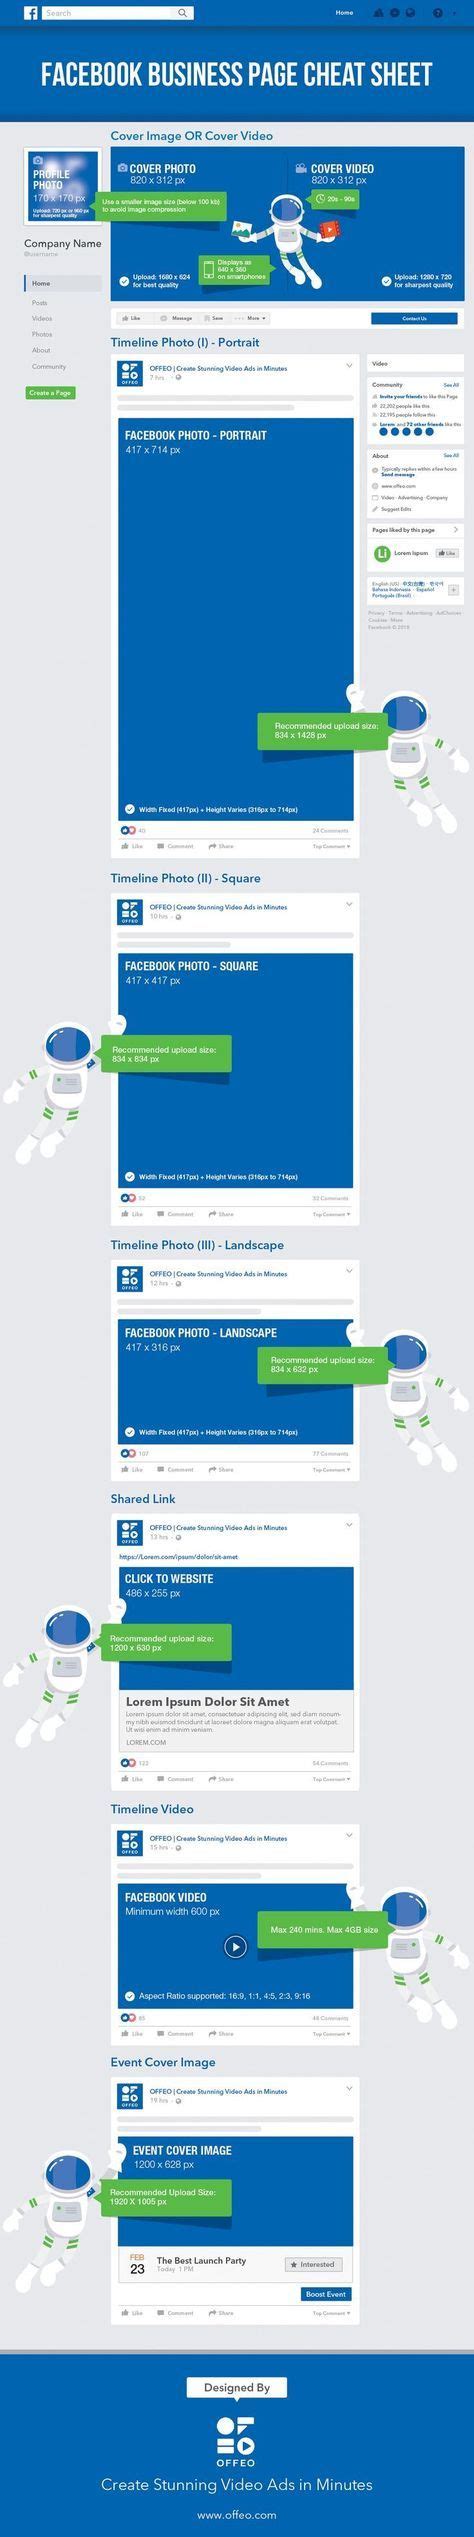 Facebook Cheat Sheet Business Pages Updated Offeo Facebook Cheat